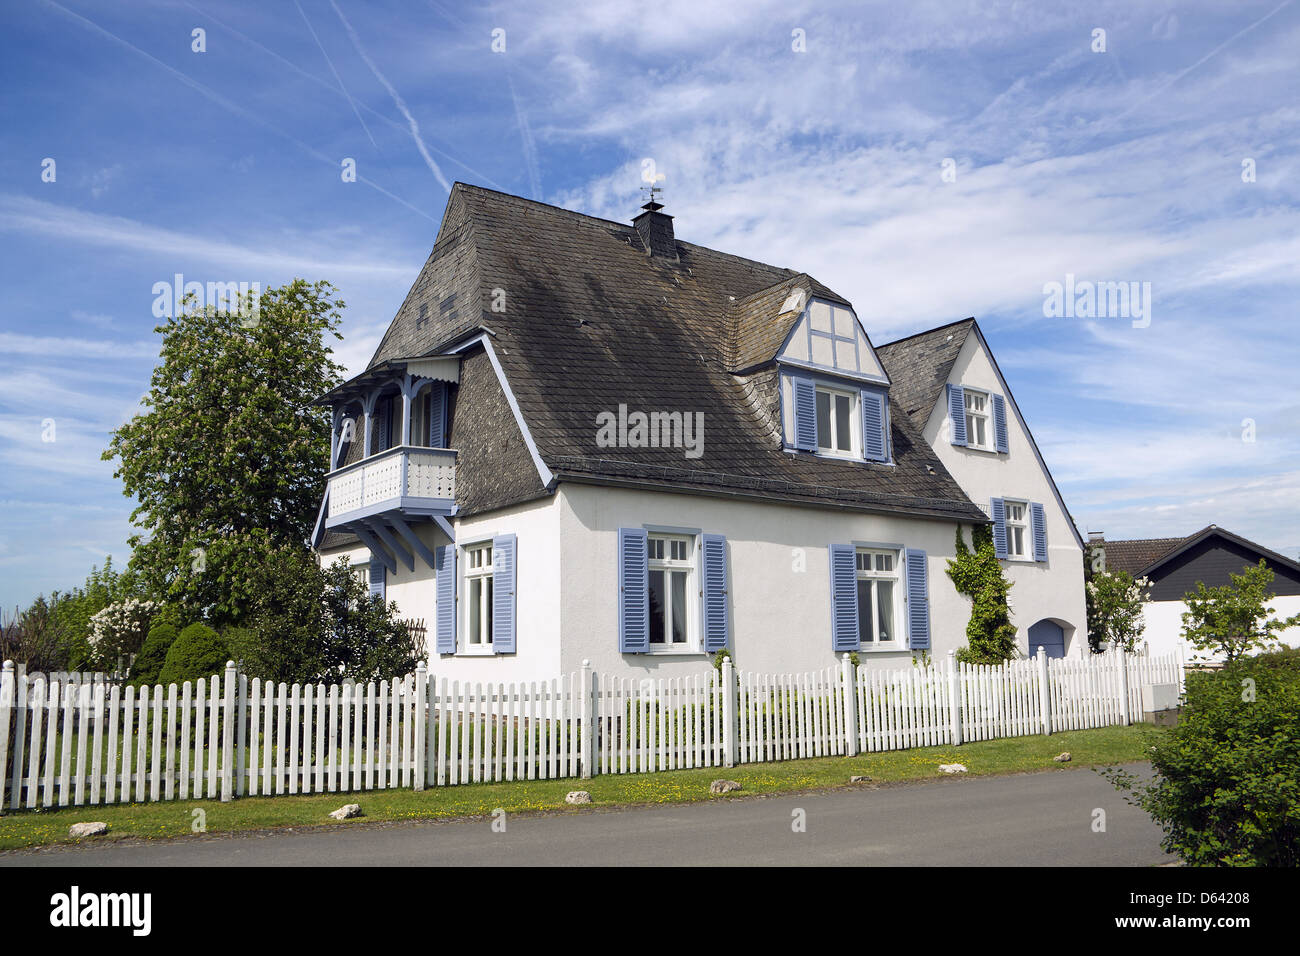 house with thatched roof Stock Photo